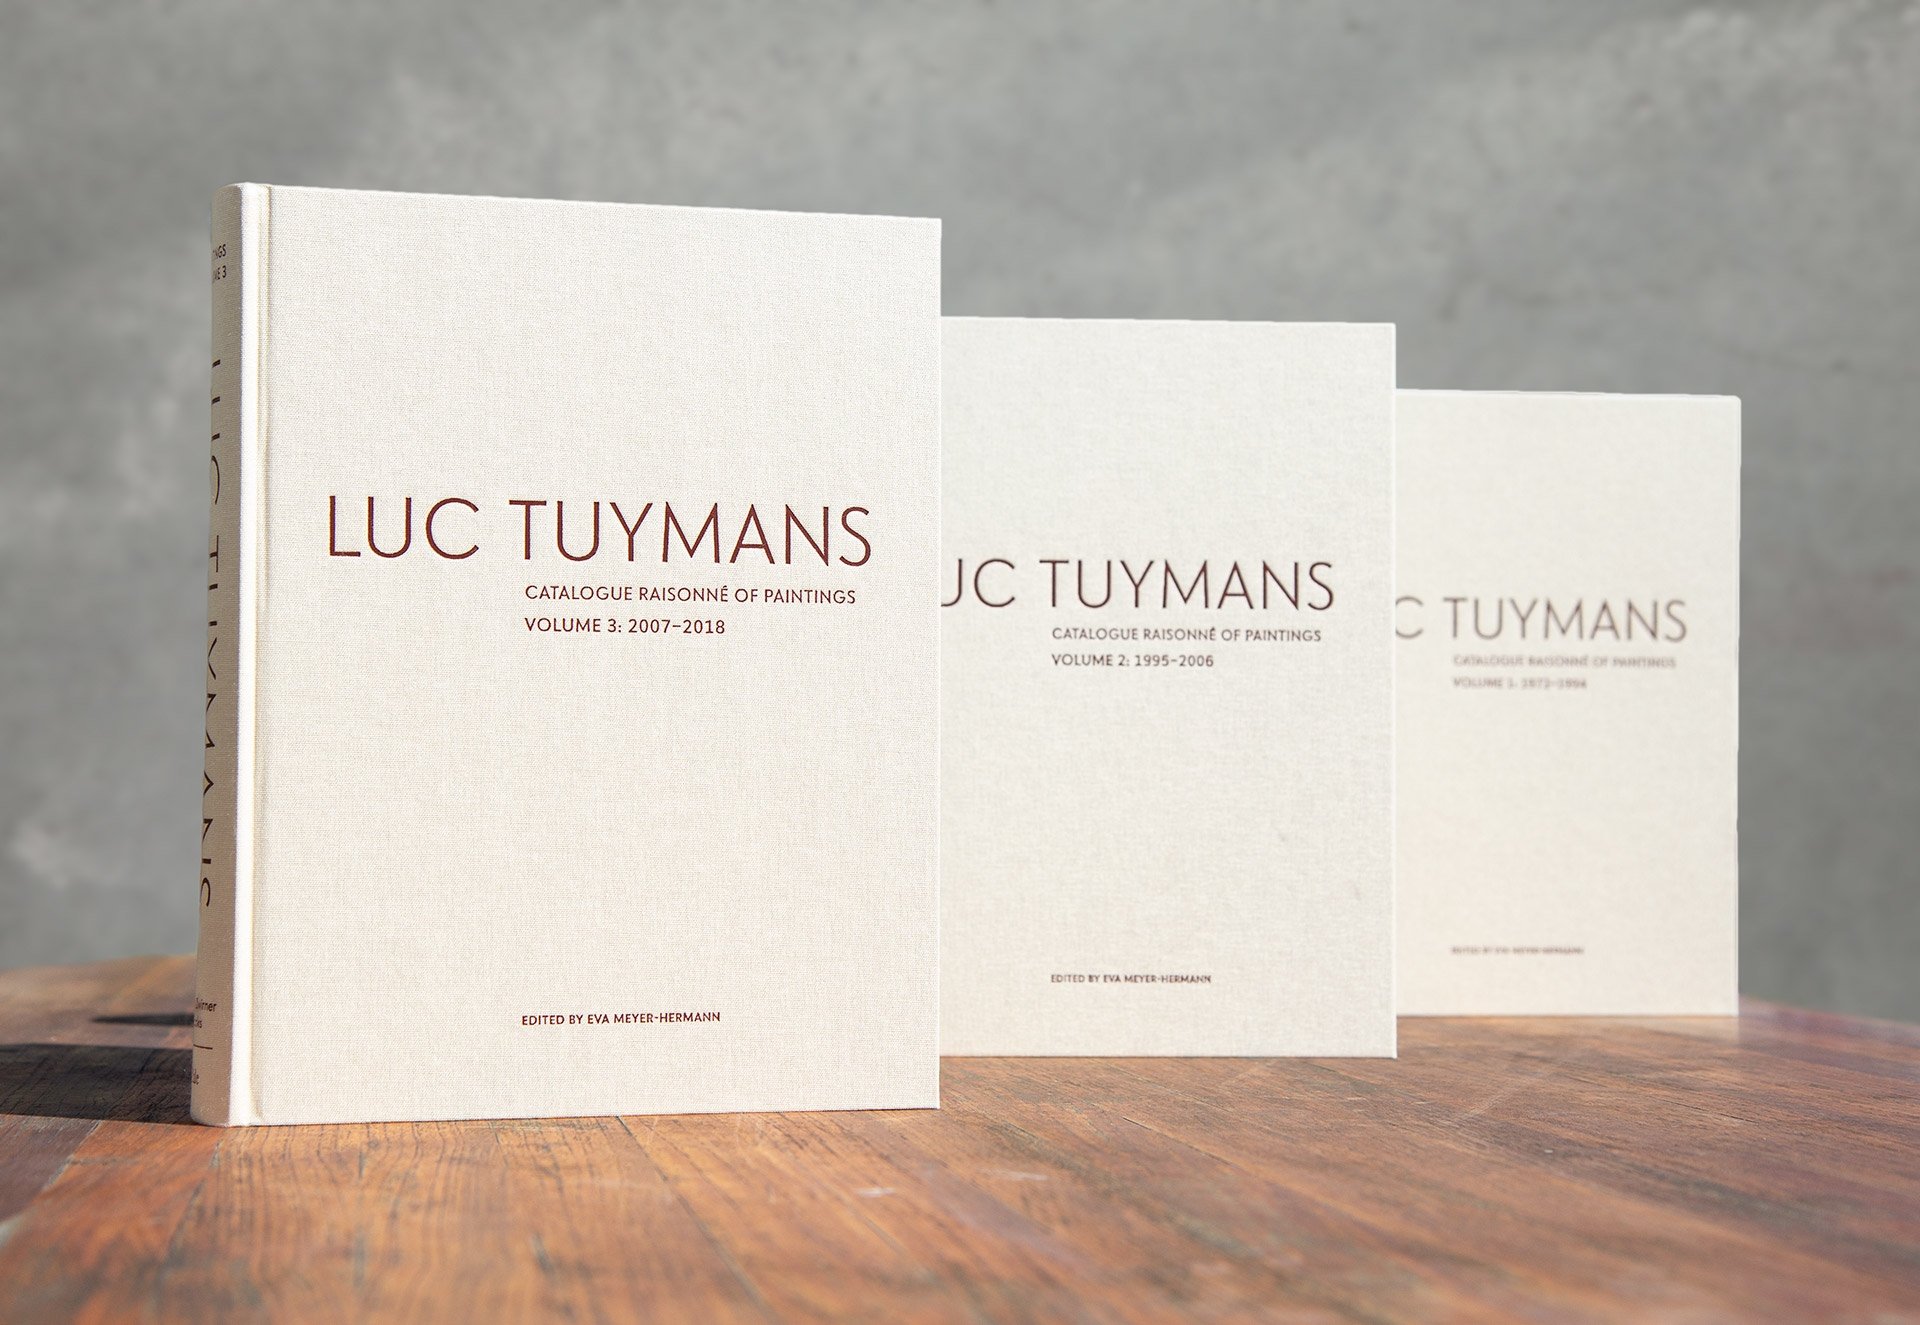 A photo of Luc Tuymans Catalogue Raisonné of Paintings, volumes 1, 2, and 3.